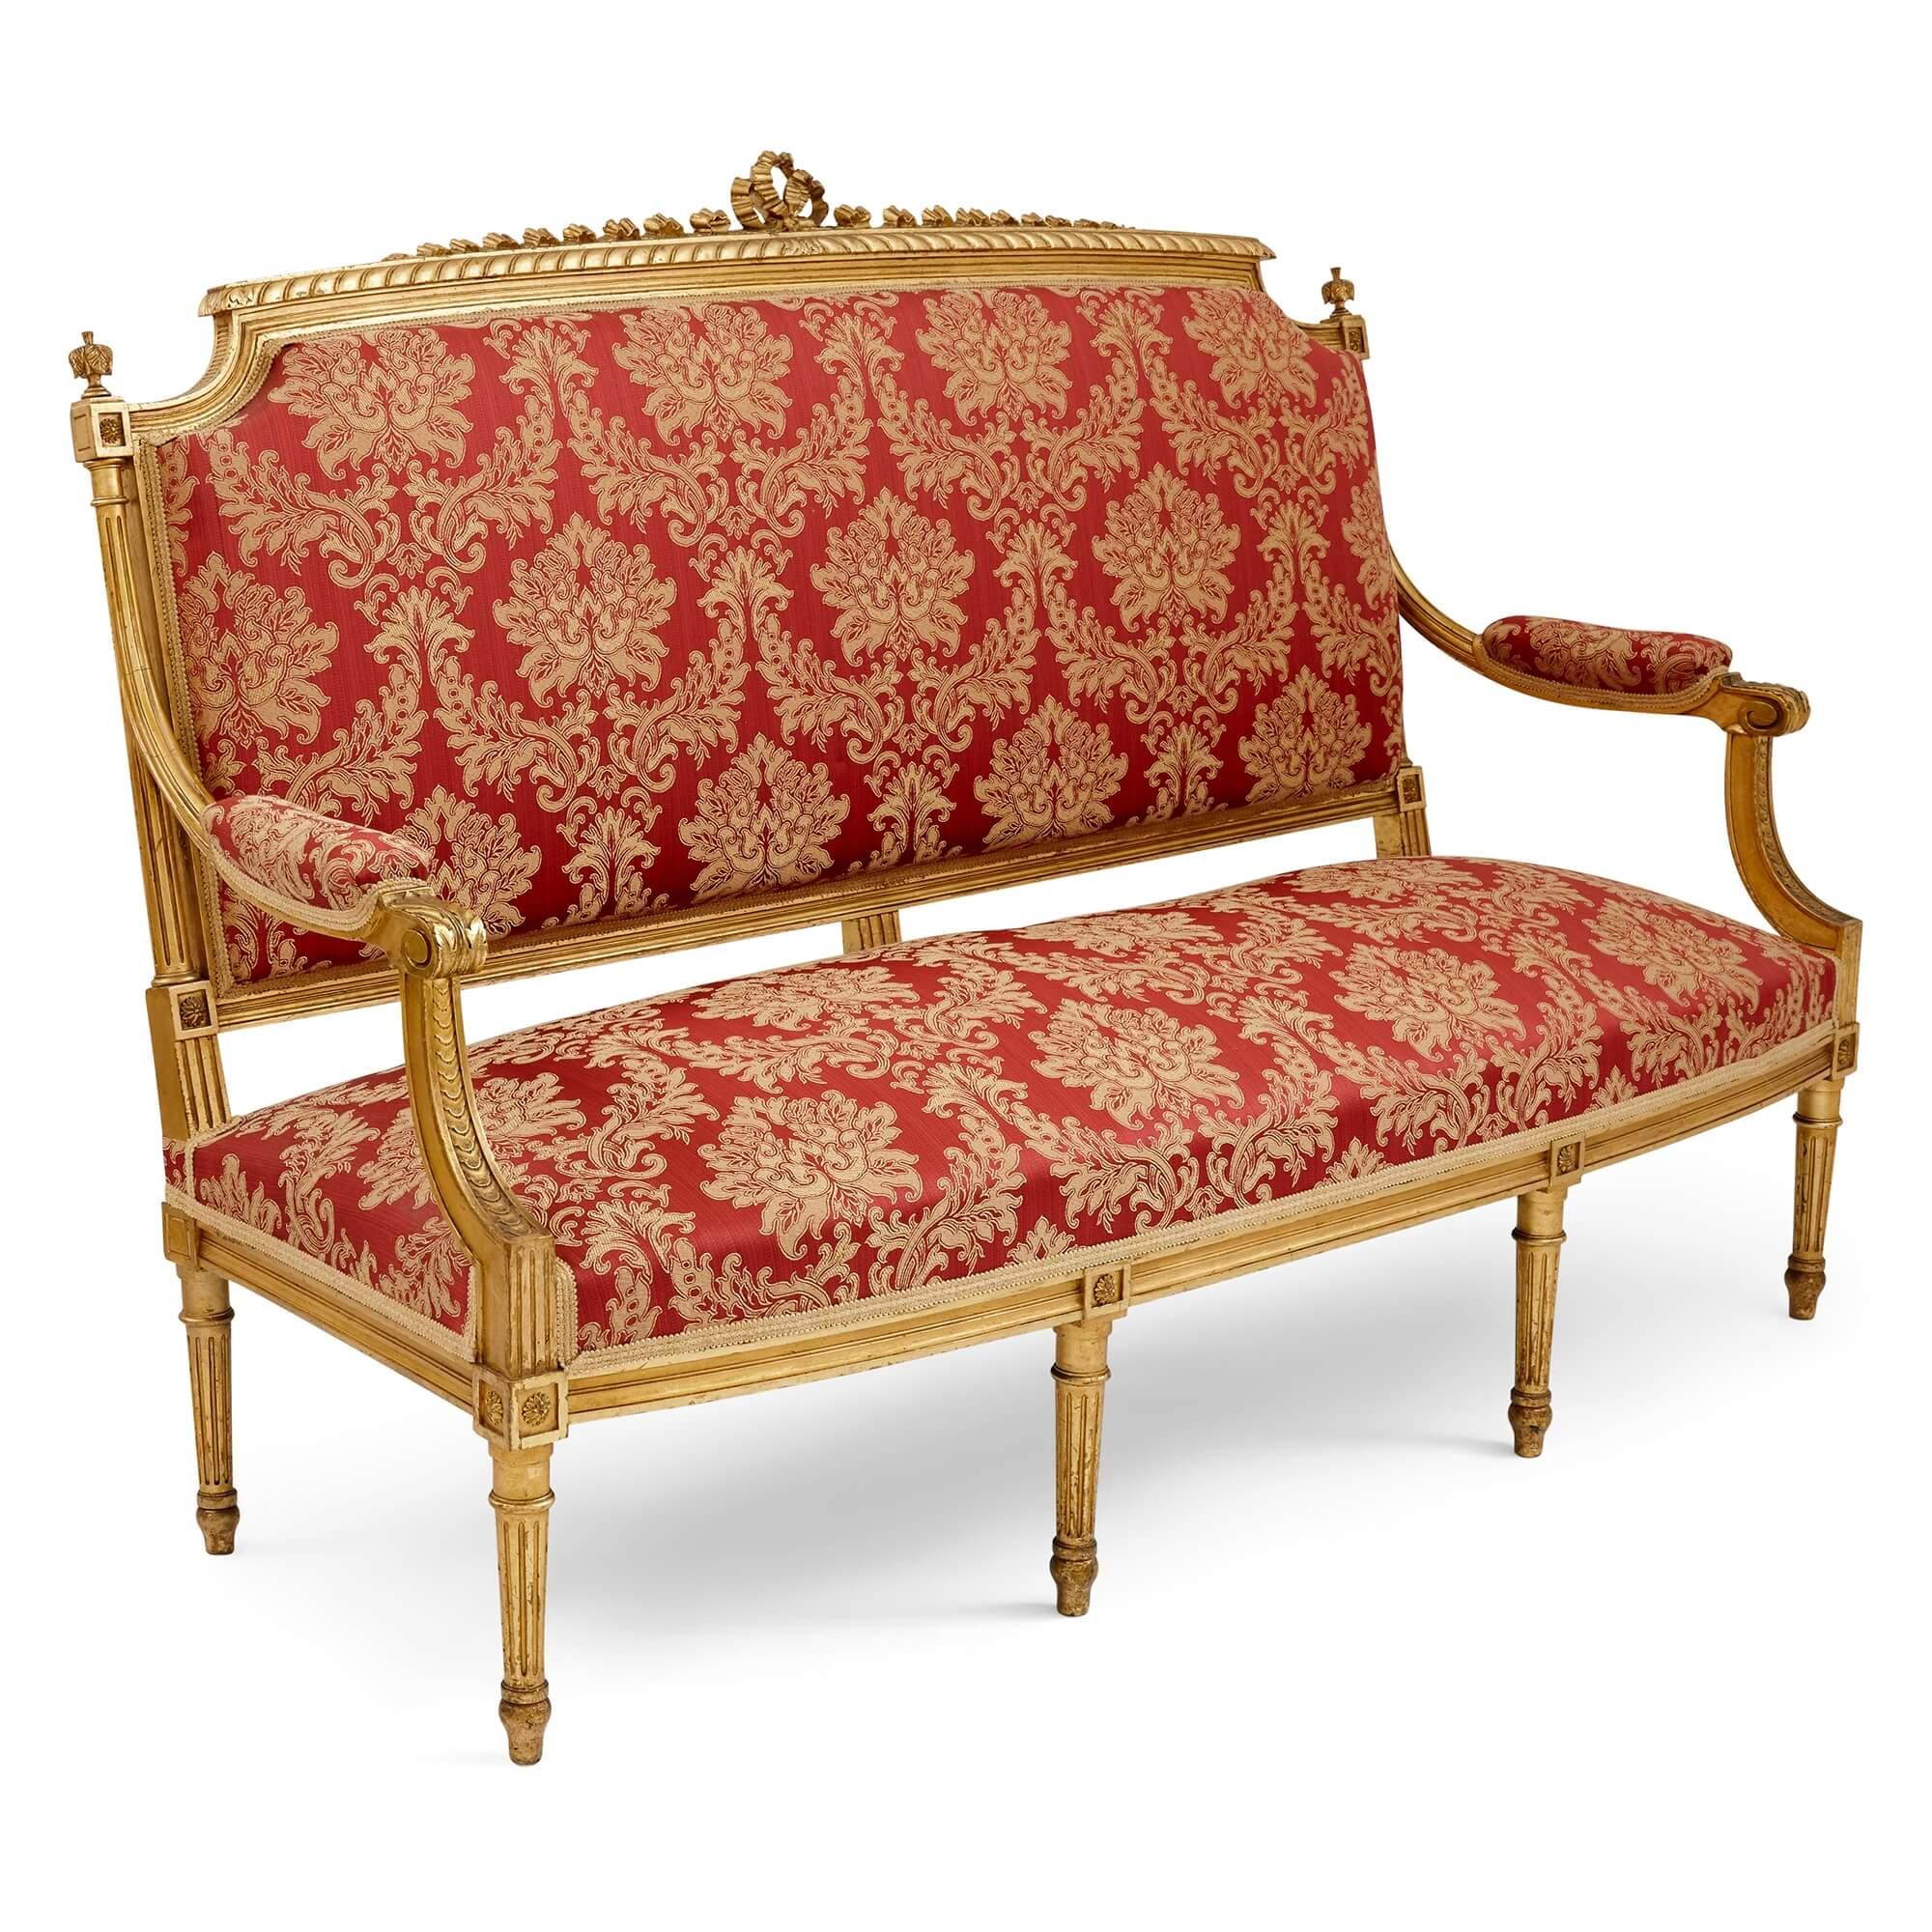 A Louis XVI Style Giltwood Salon Suite
French, 19th Century
Canape:  height 113cm, width 164cm, depth 65cm
Armchair: height 104cm, width 65cm, depth 57cm
Chair: height 99cm, width 54cm, depth 52cm

This superb five-piece salon suite consists of a